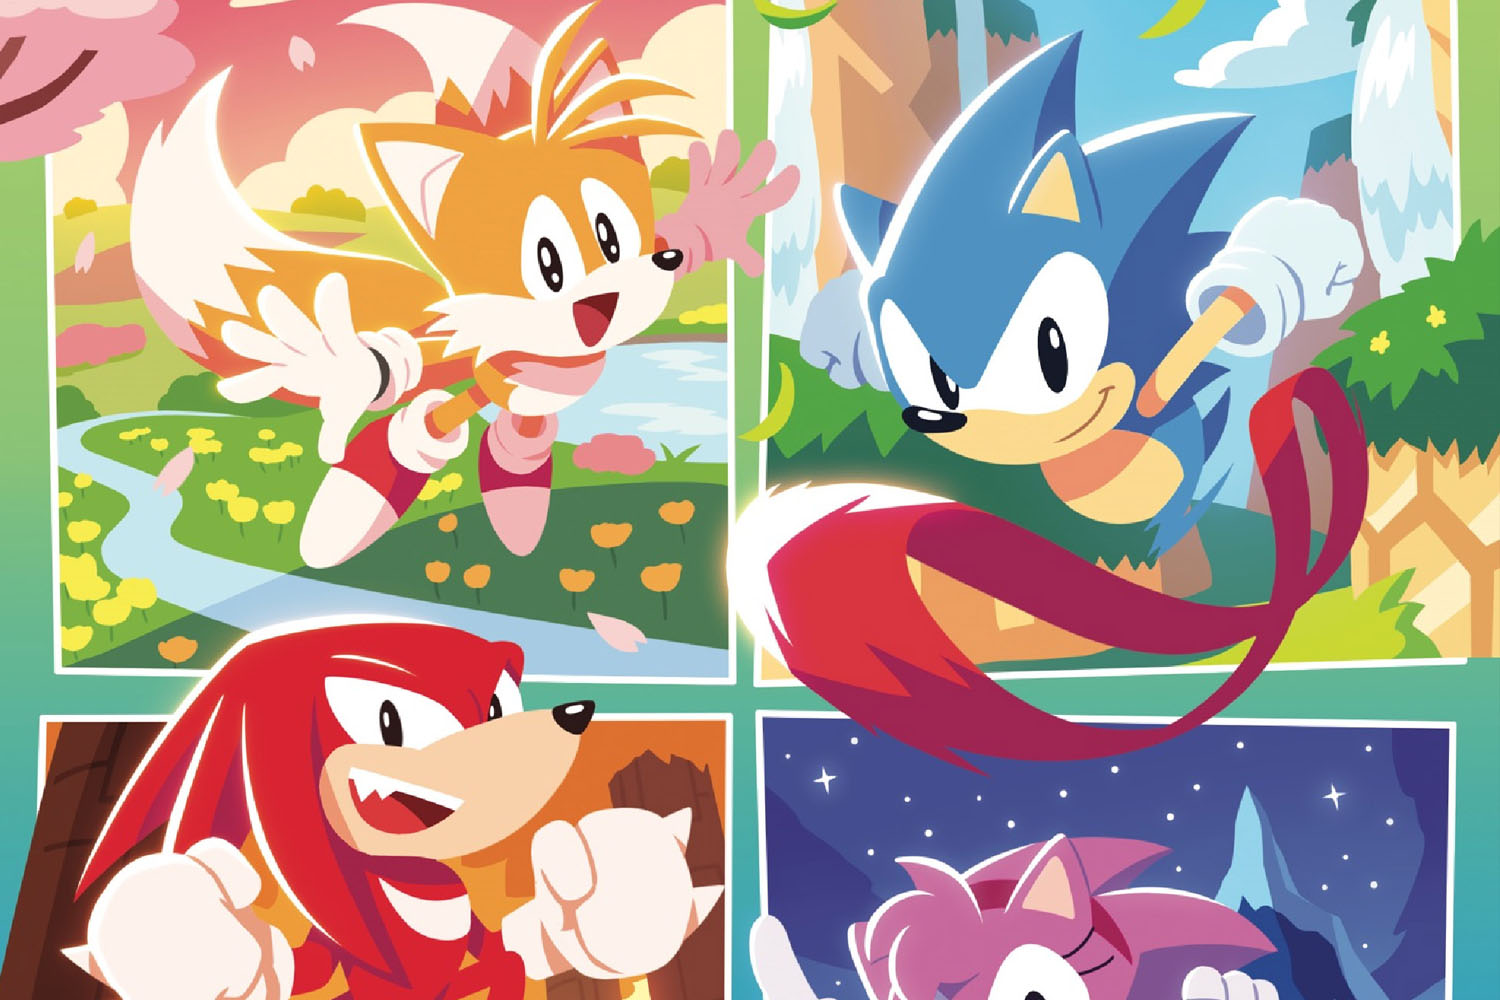 'Sonic the Hedgehog 30th Anniversary Special' is IDW's greatest Sonic comic thus far